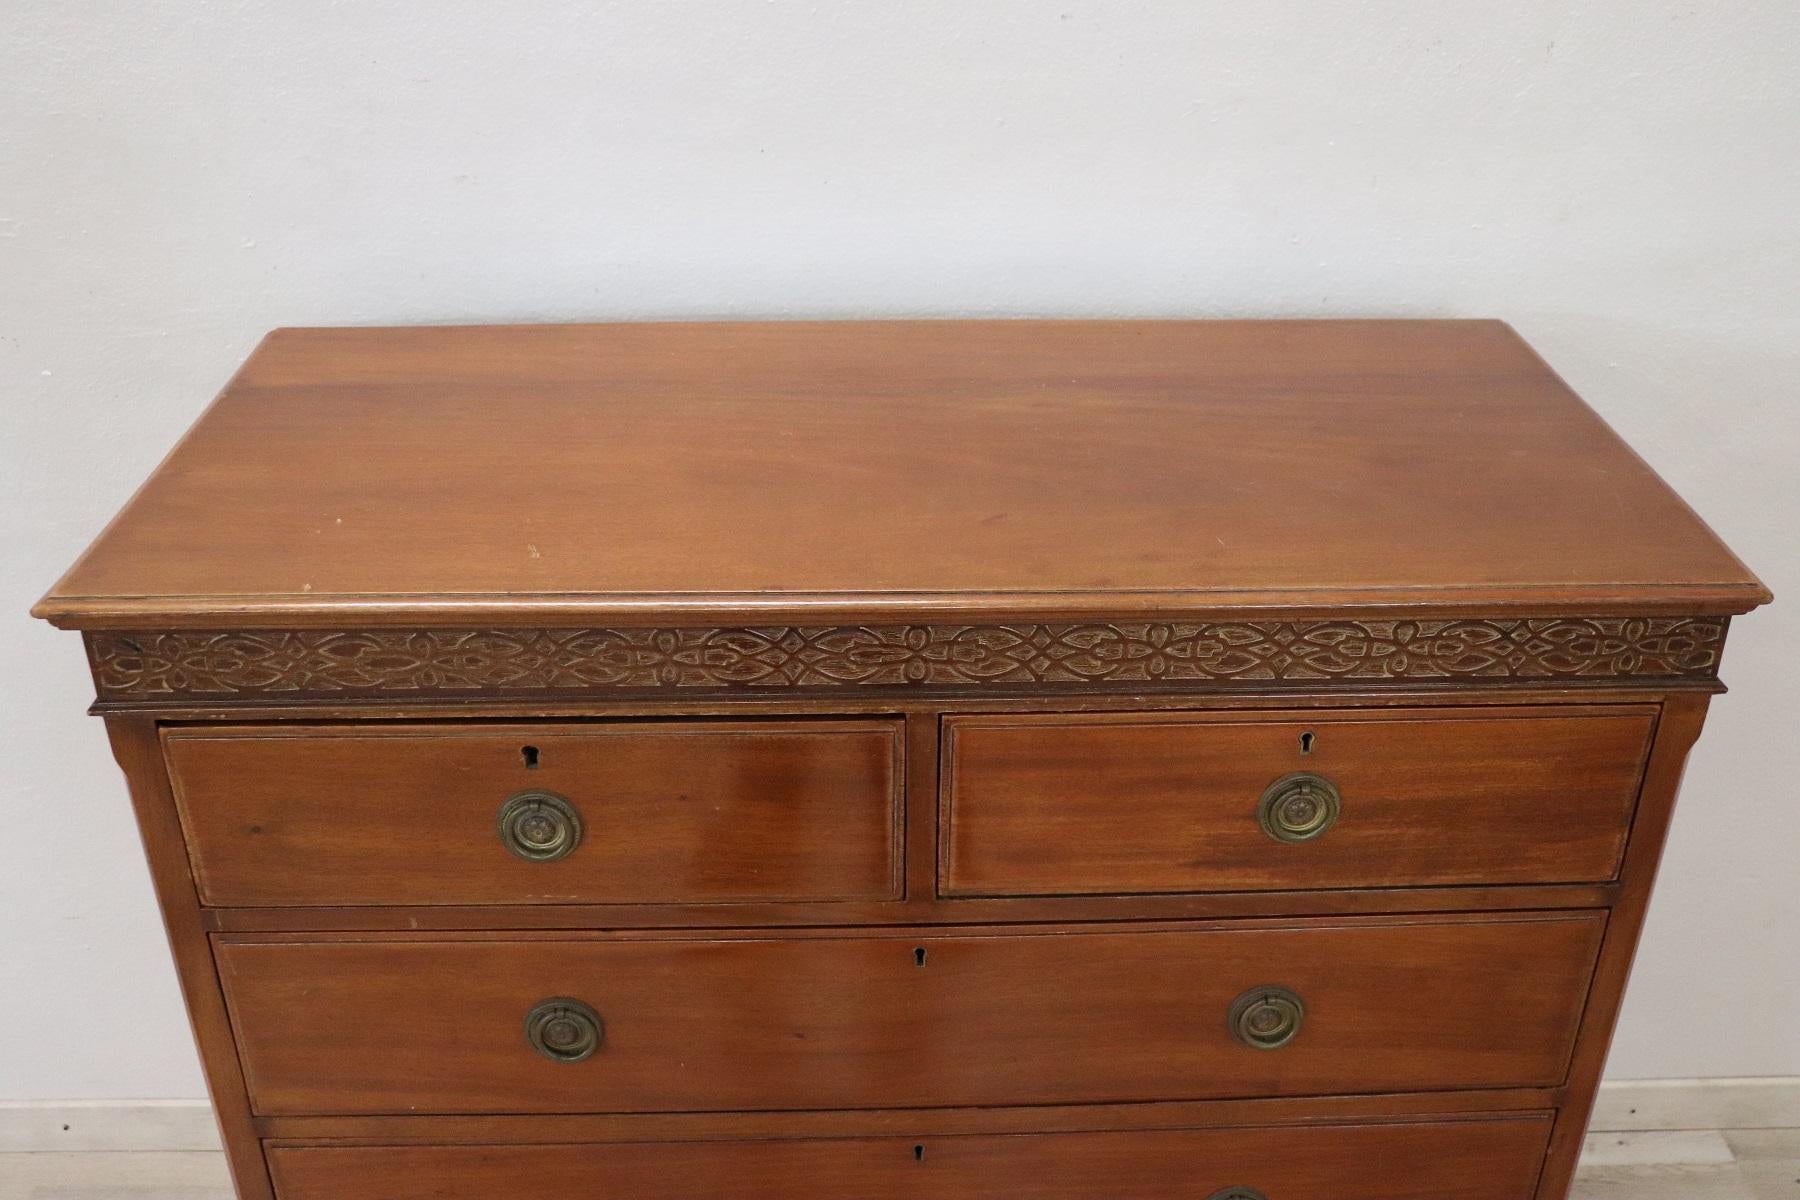 Italian chest of drawers 1950s in mahogany wood. Very linear and essential with five comfortable drawers. Refined decorative frame under the top carved in the wood. The handles are in finely chiseled bronze It shows signs of wear at the finishing